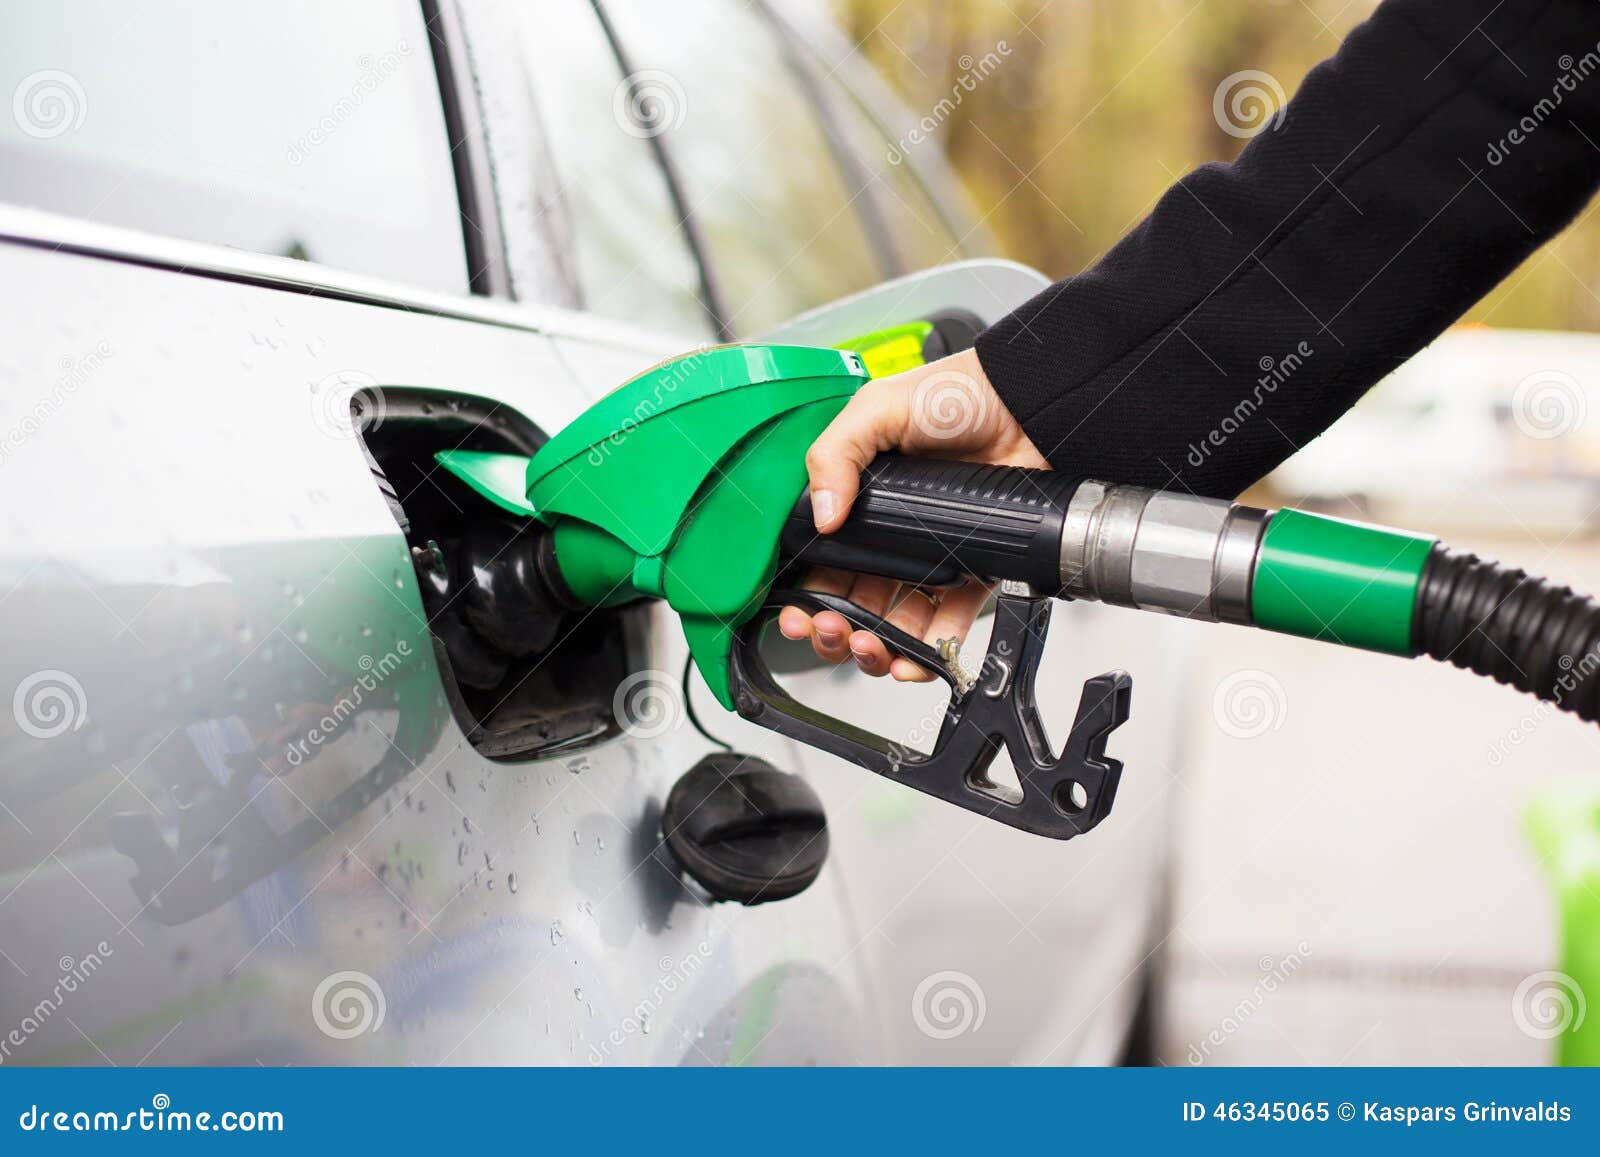 close-up photo of hand holding fuel pump and refilling car at petrol station